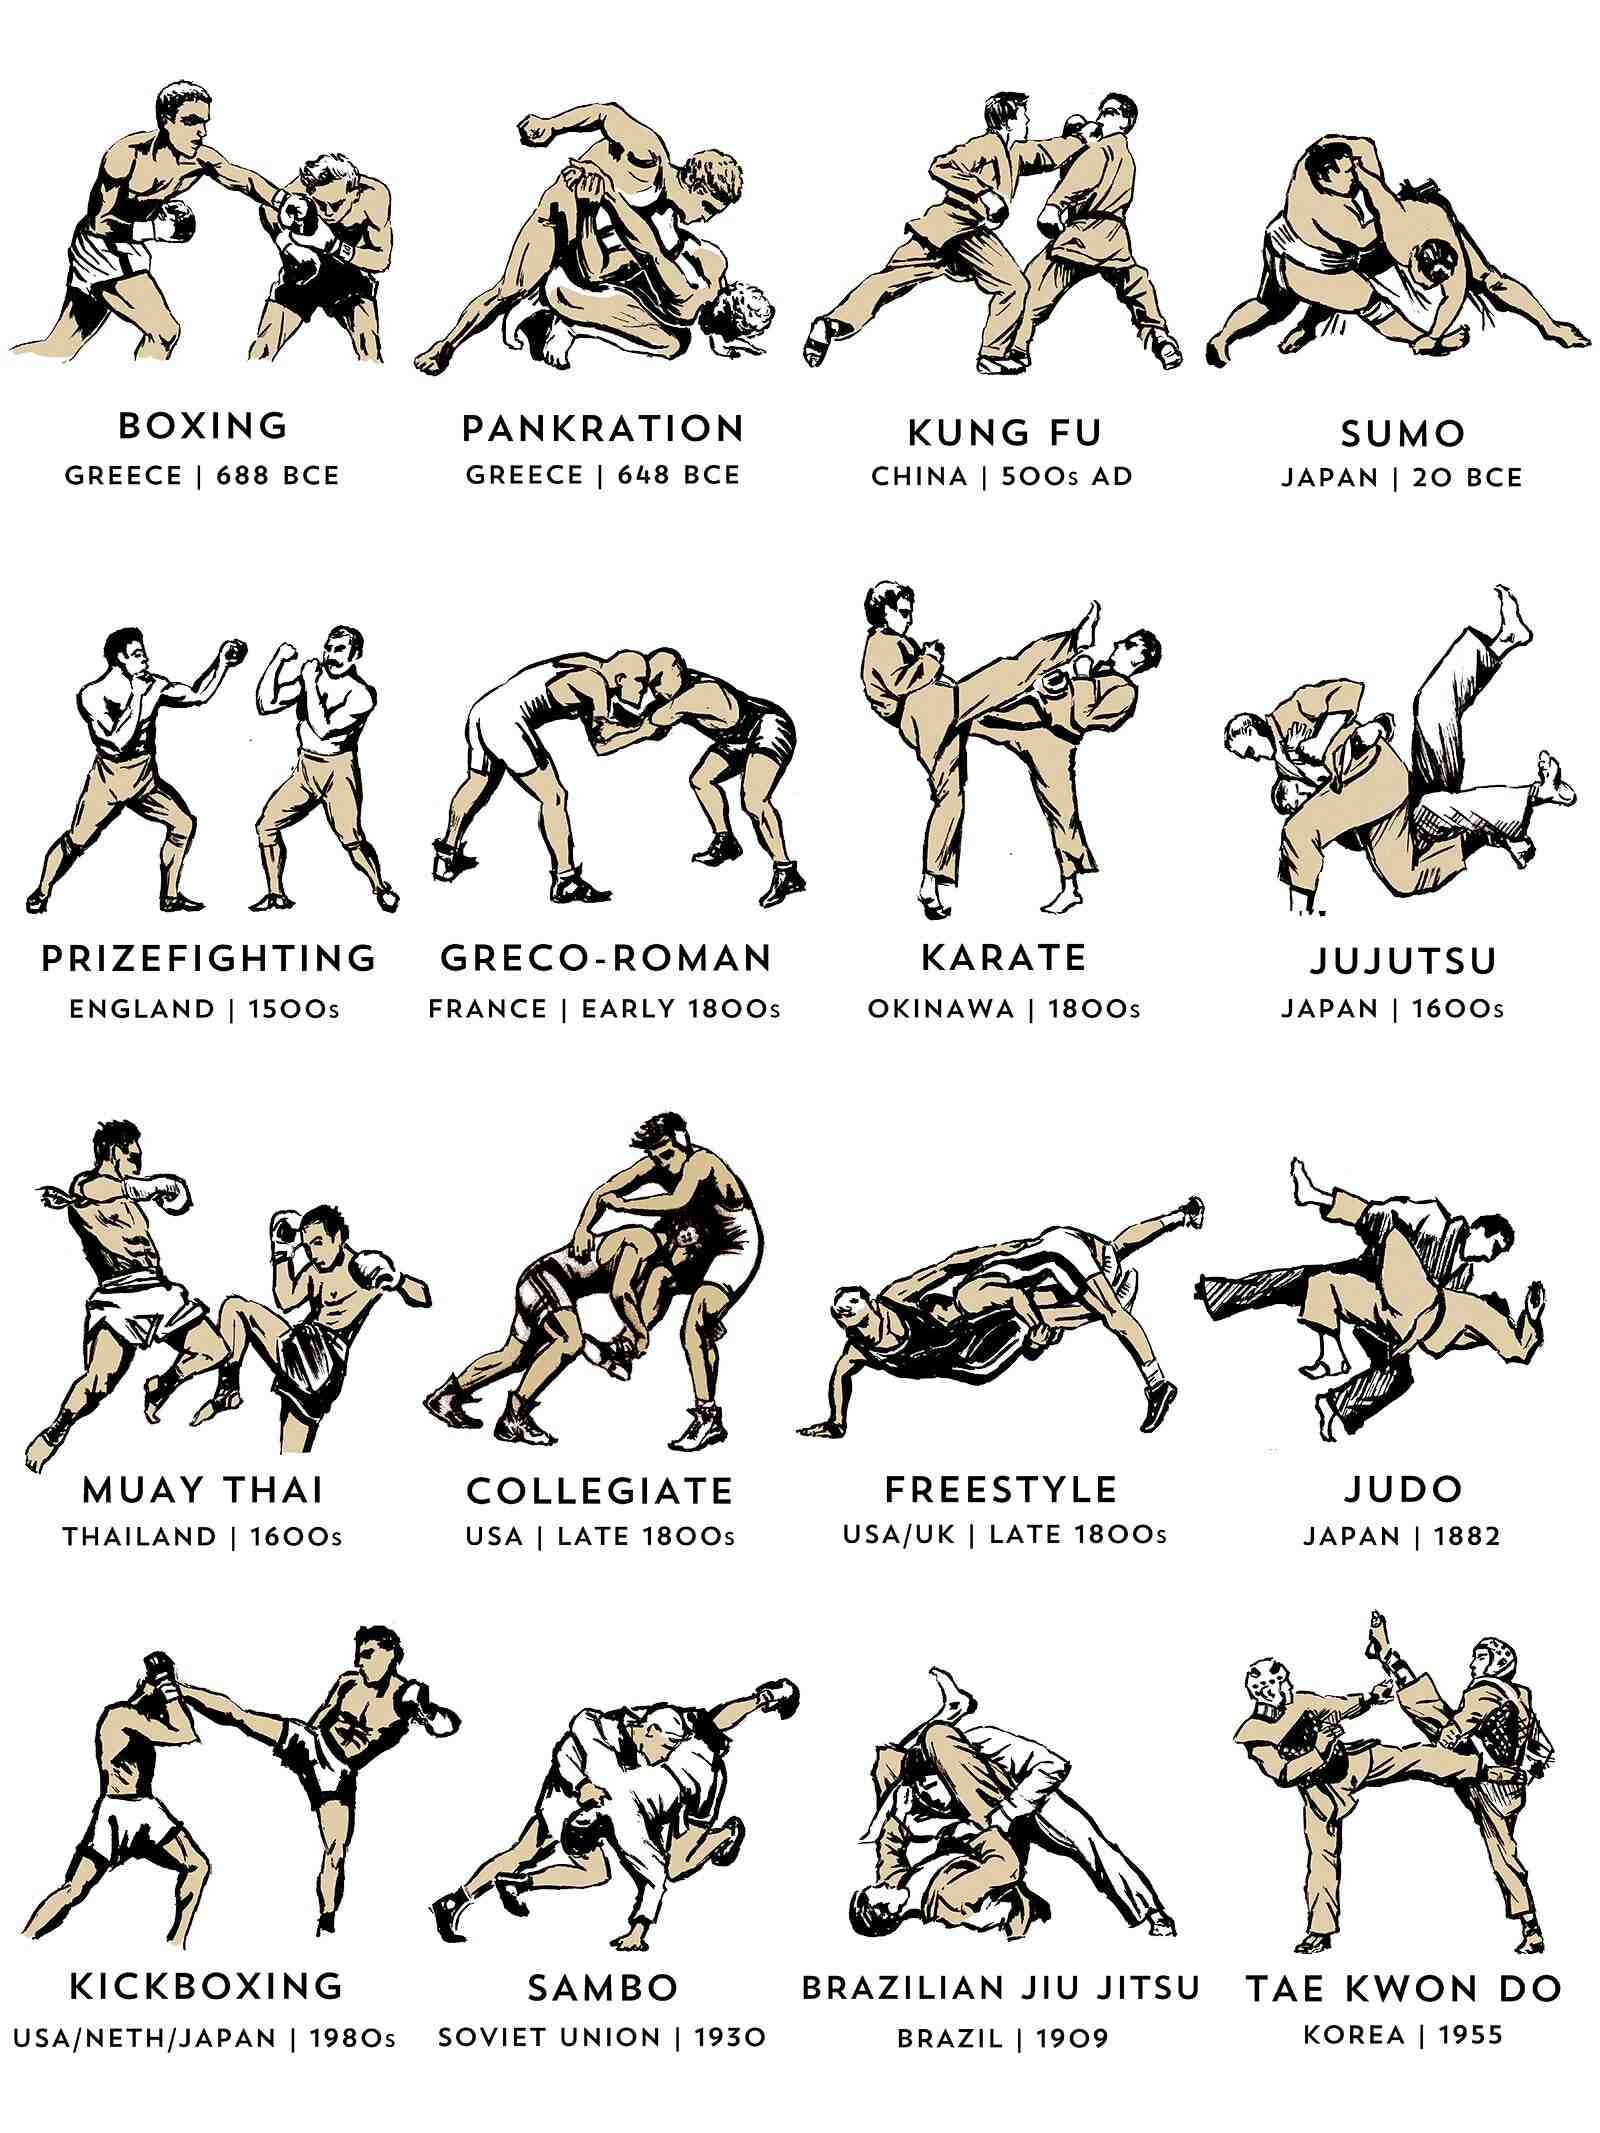 How many styles of martial arts are there?